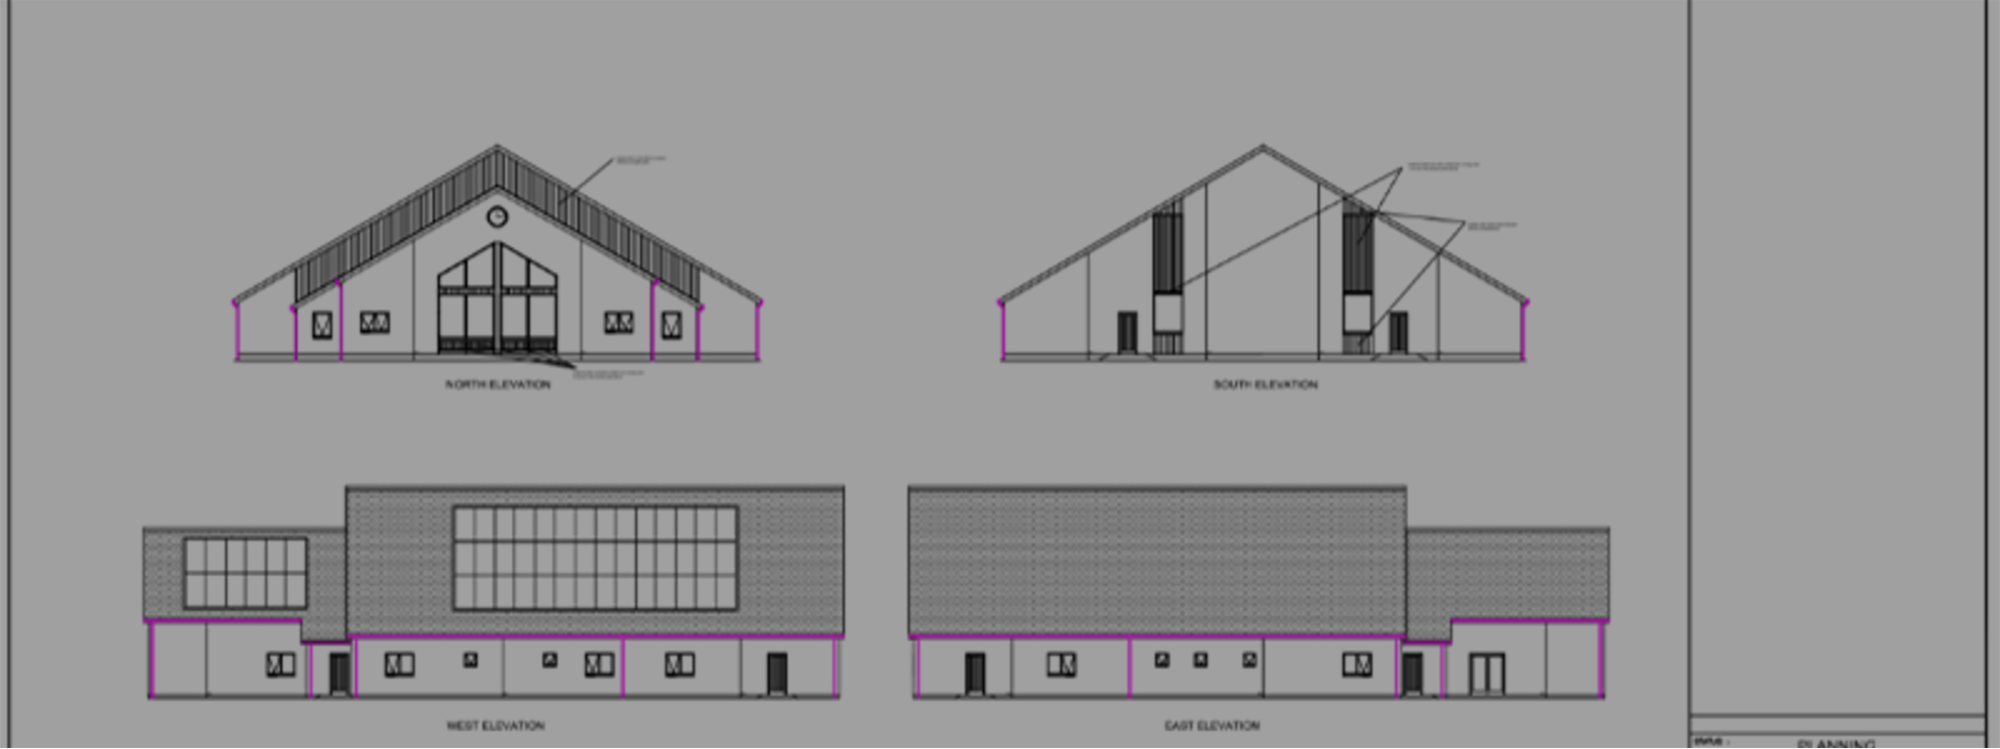 Church Build Plans*Keep up to date on our plans*HFC Church Build